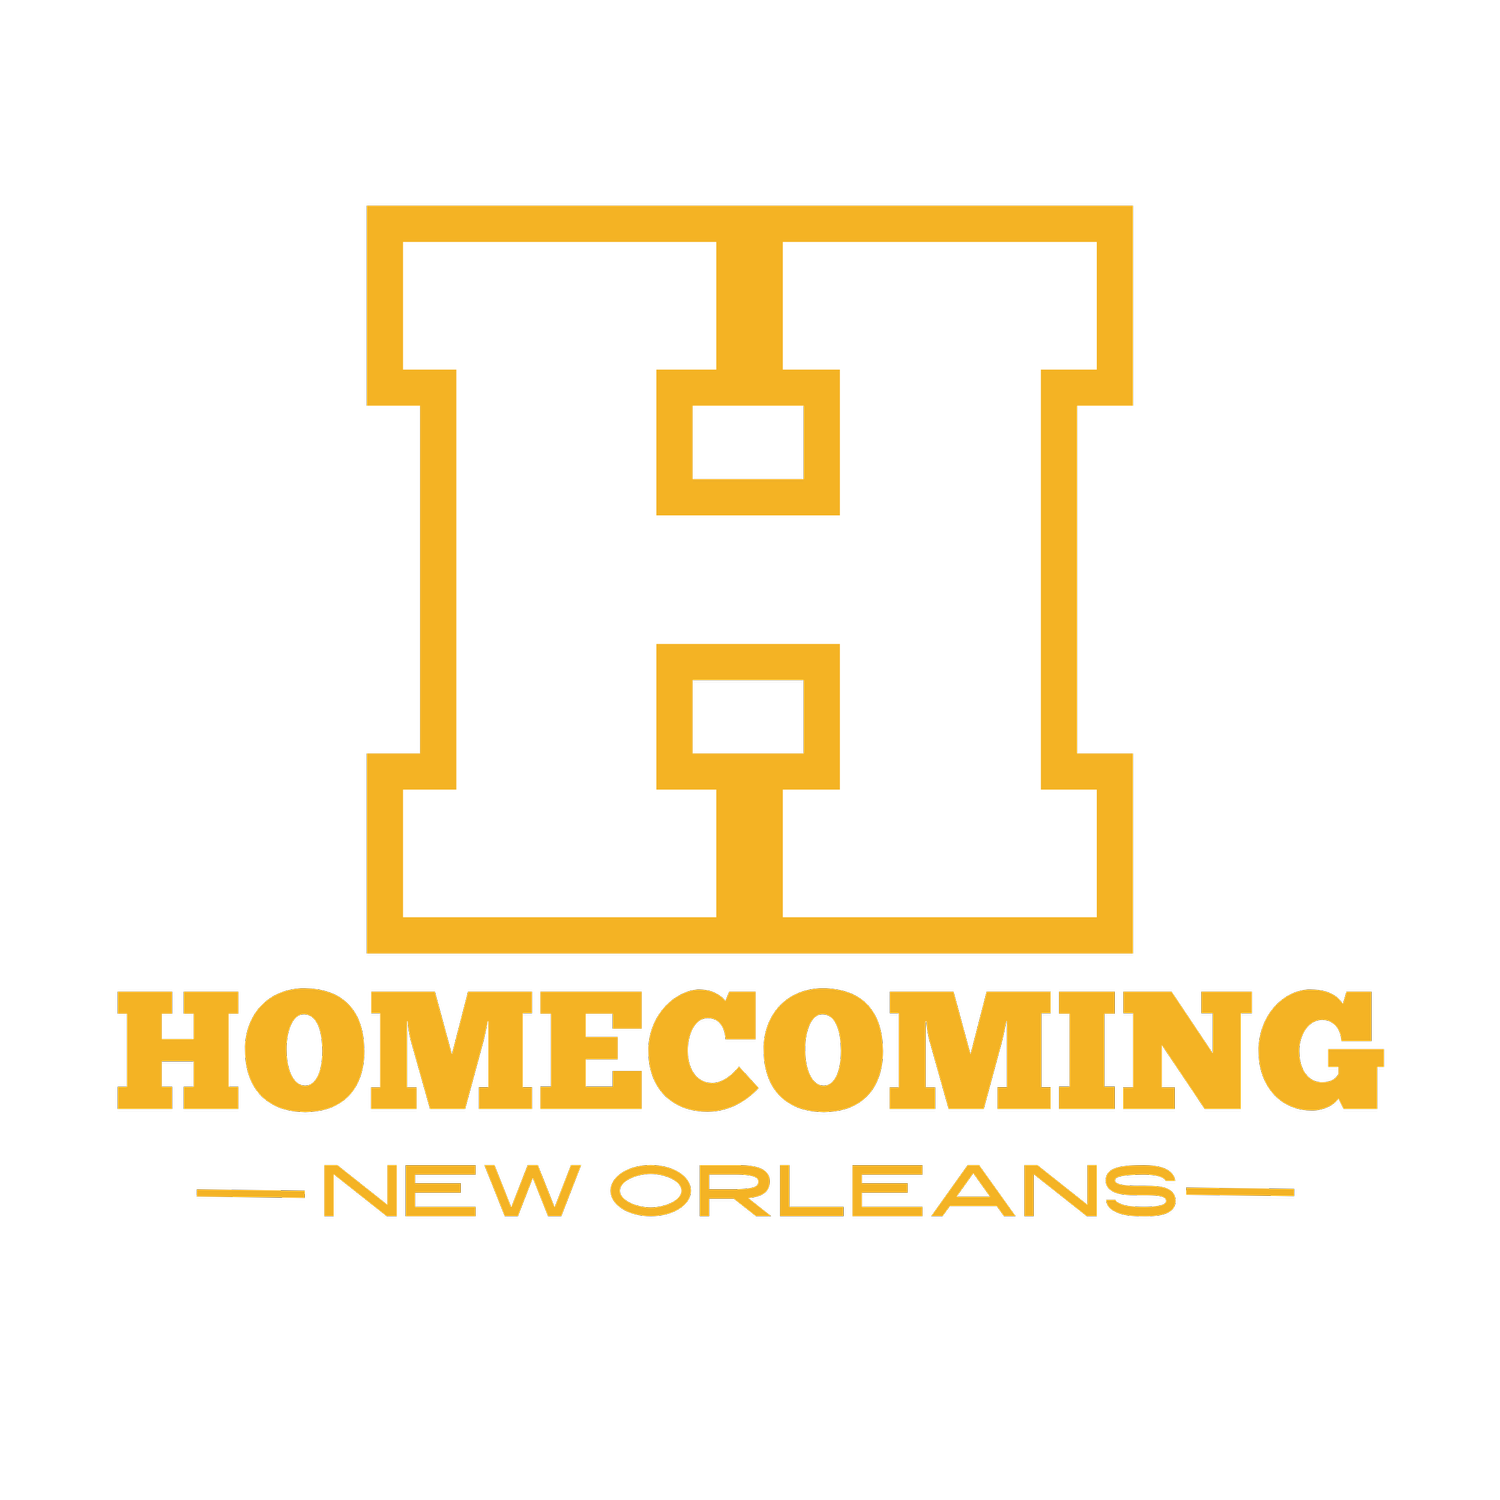 New Orleans Homecoming